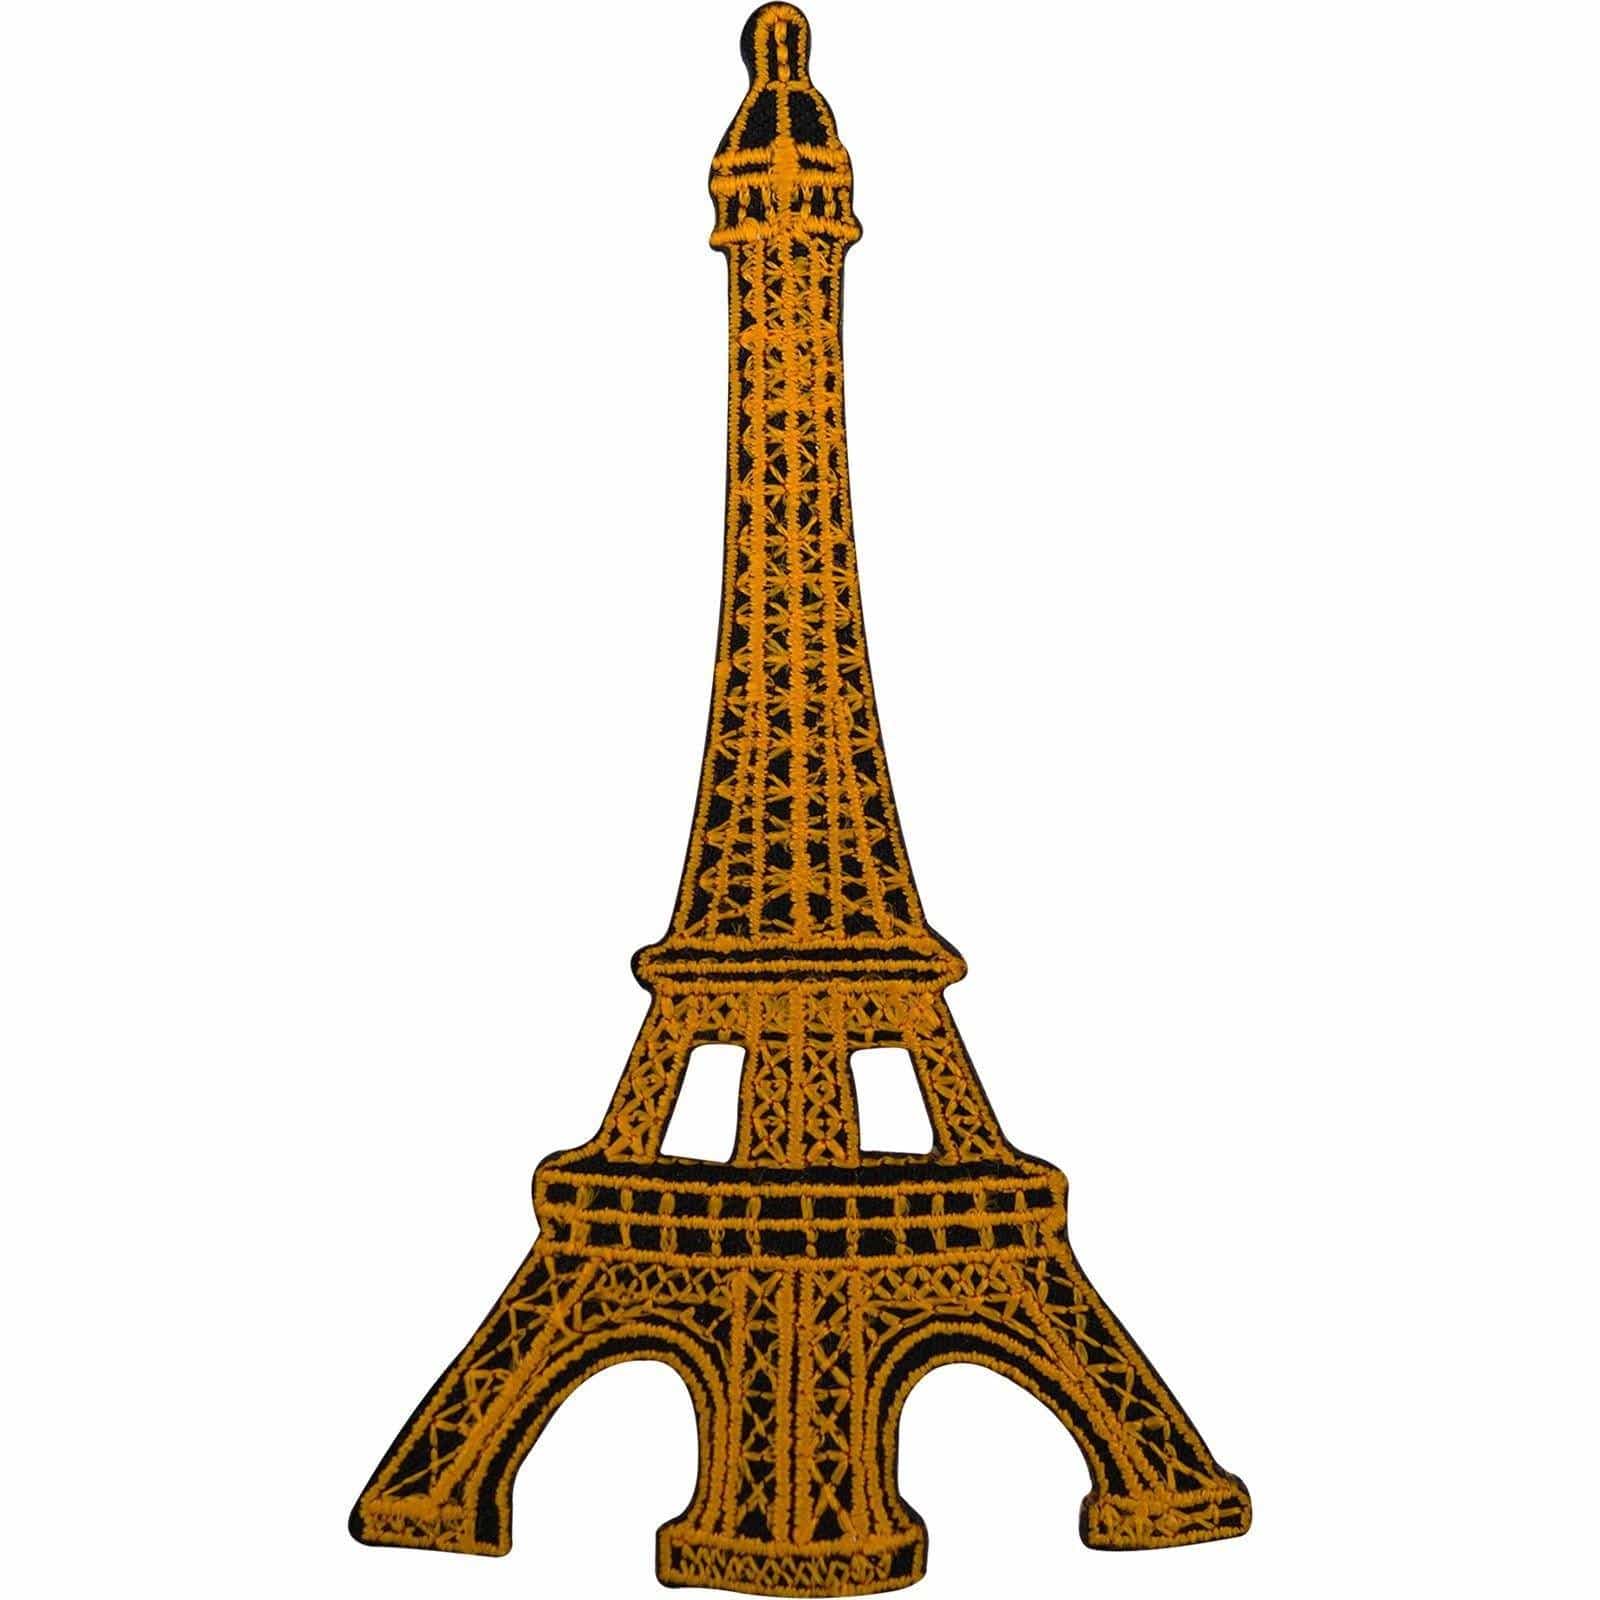 Eiffel Tower Badge Embroidery Patch Iron / Sew On French Paris France